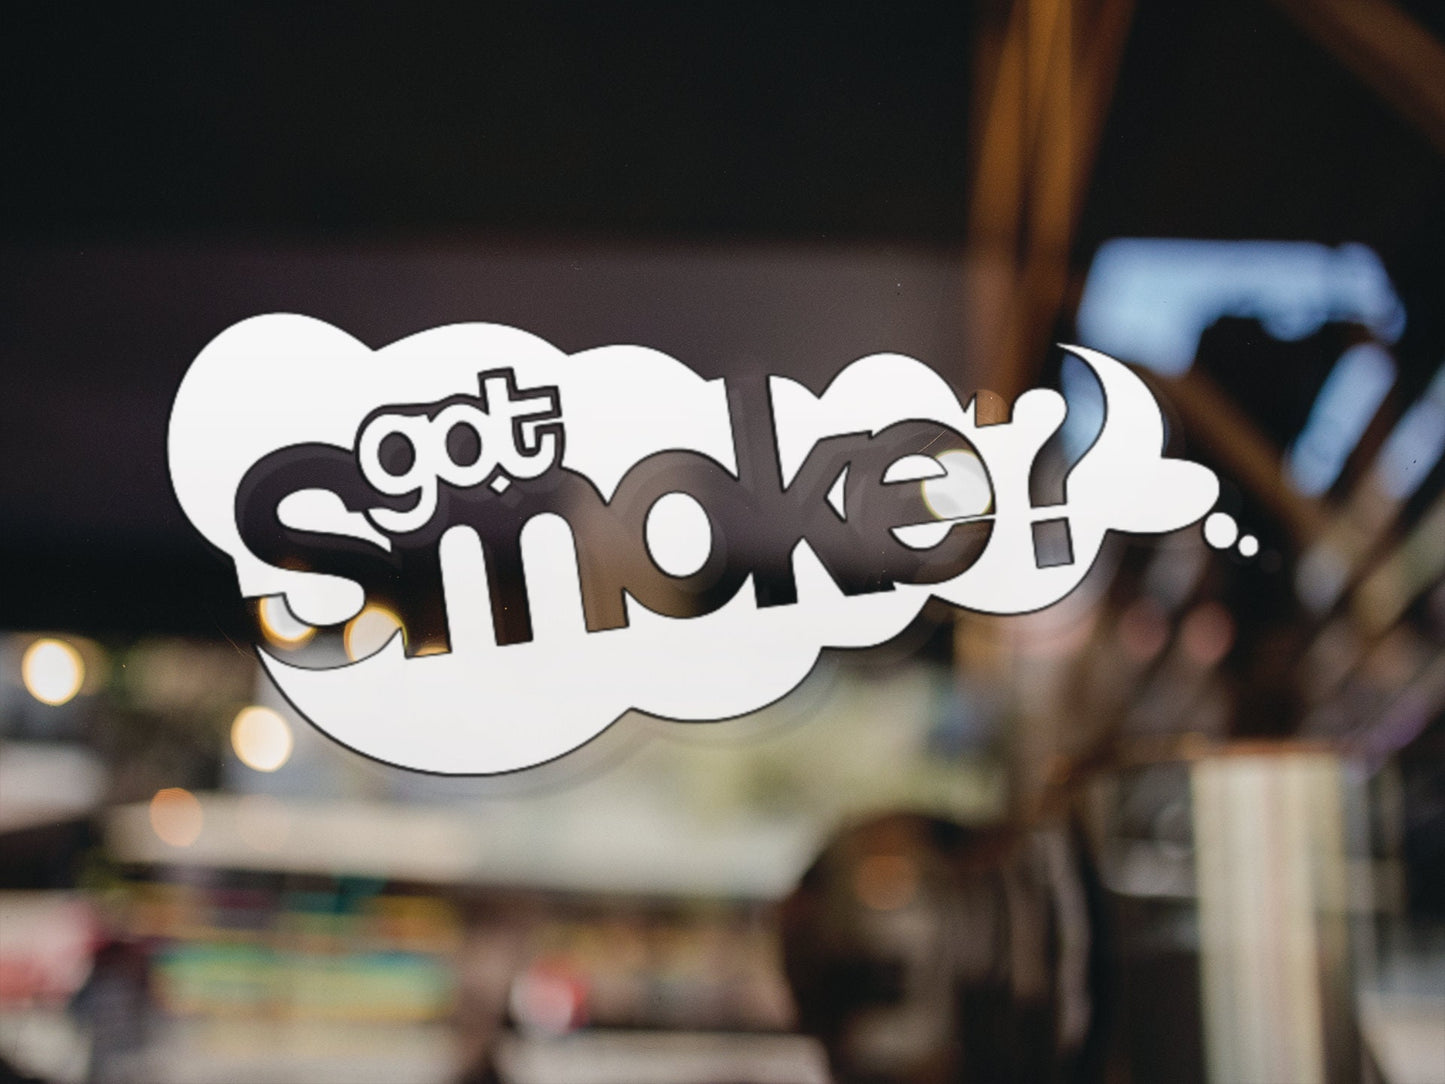 Got Smoke? Decal - Many Colors & Sizes